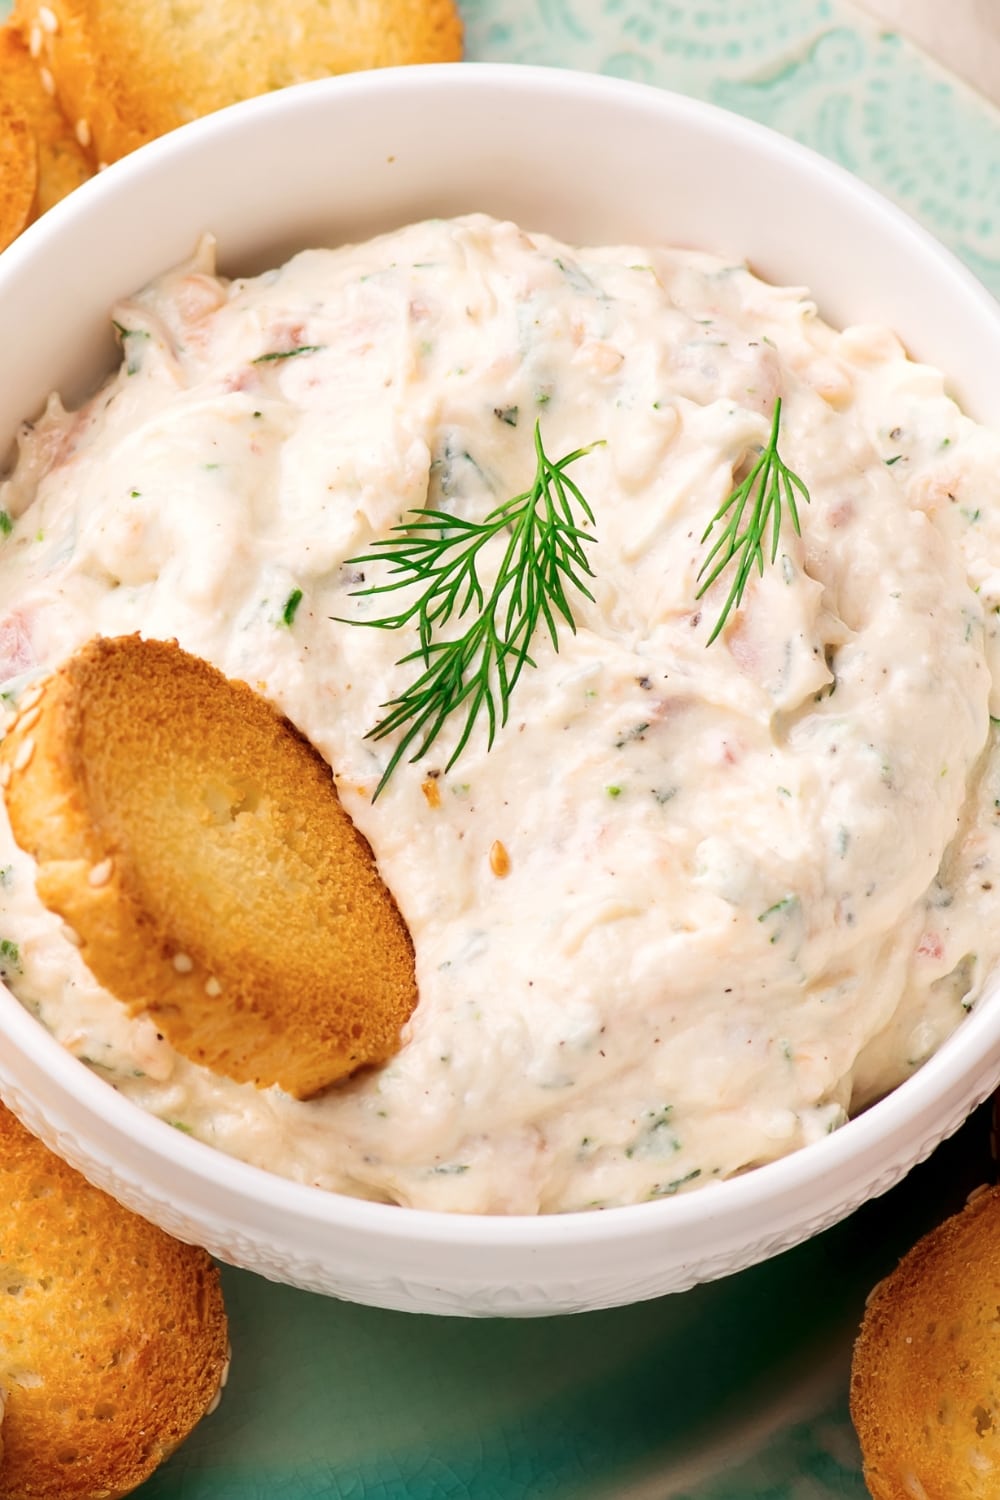 Top View of a Bowl of Homemade Smoked Salmon Dip